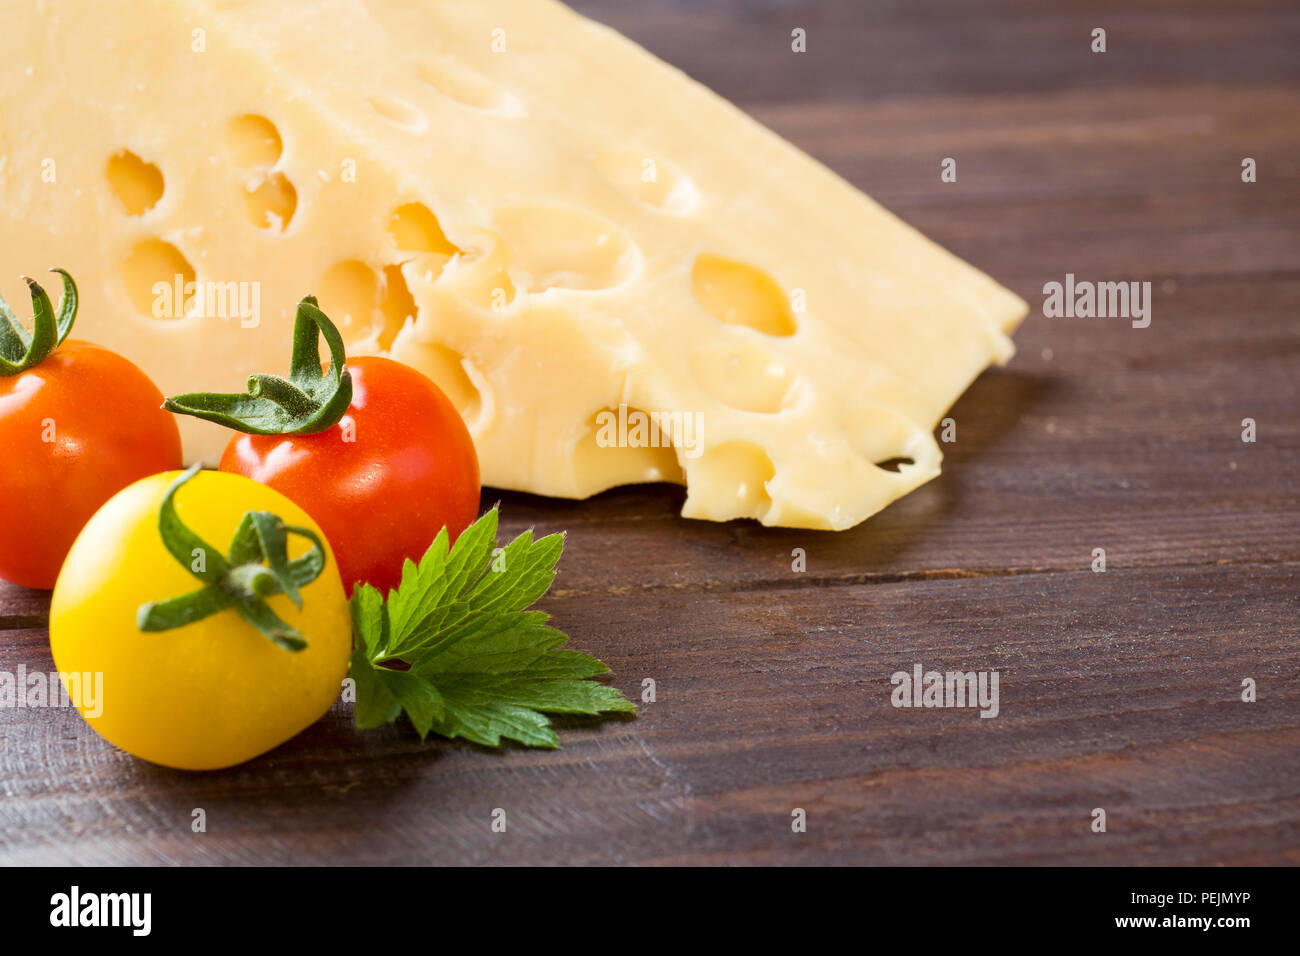 https://c8.alamy.com/comp/PEJMYP/cheese-and-tomatoes-on-dark-wooden-background-with-copy-space-PEJMYP.jpg